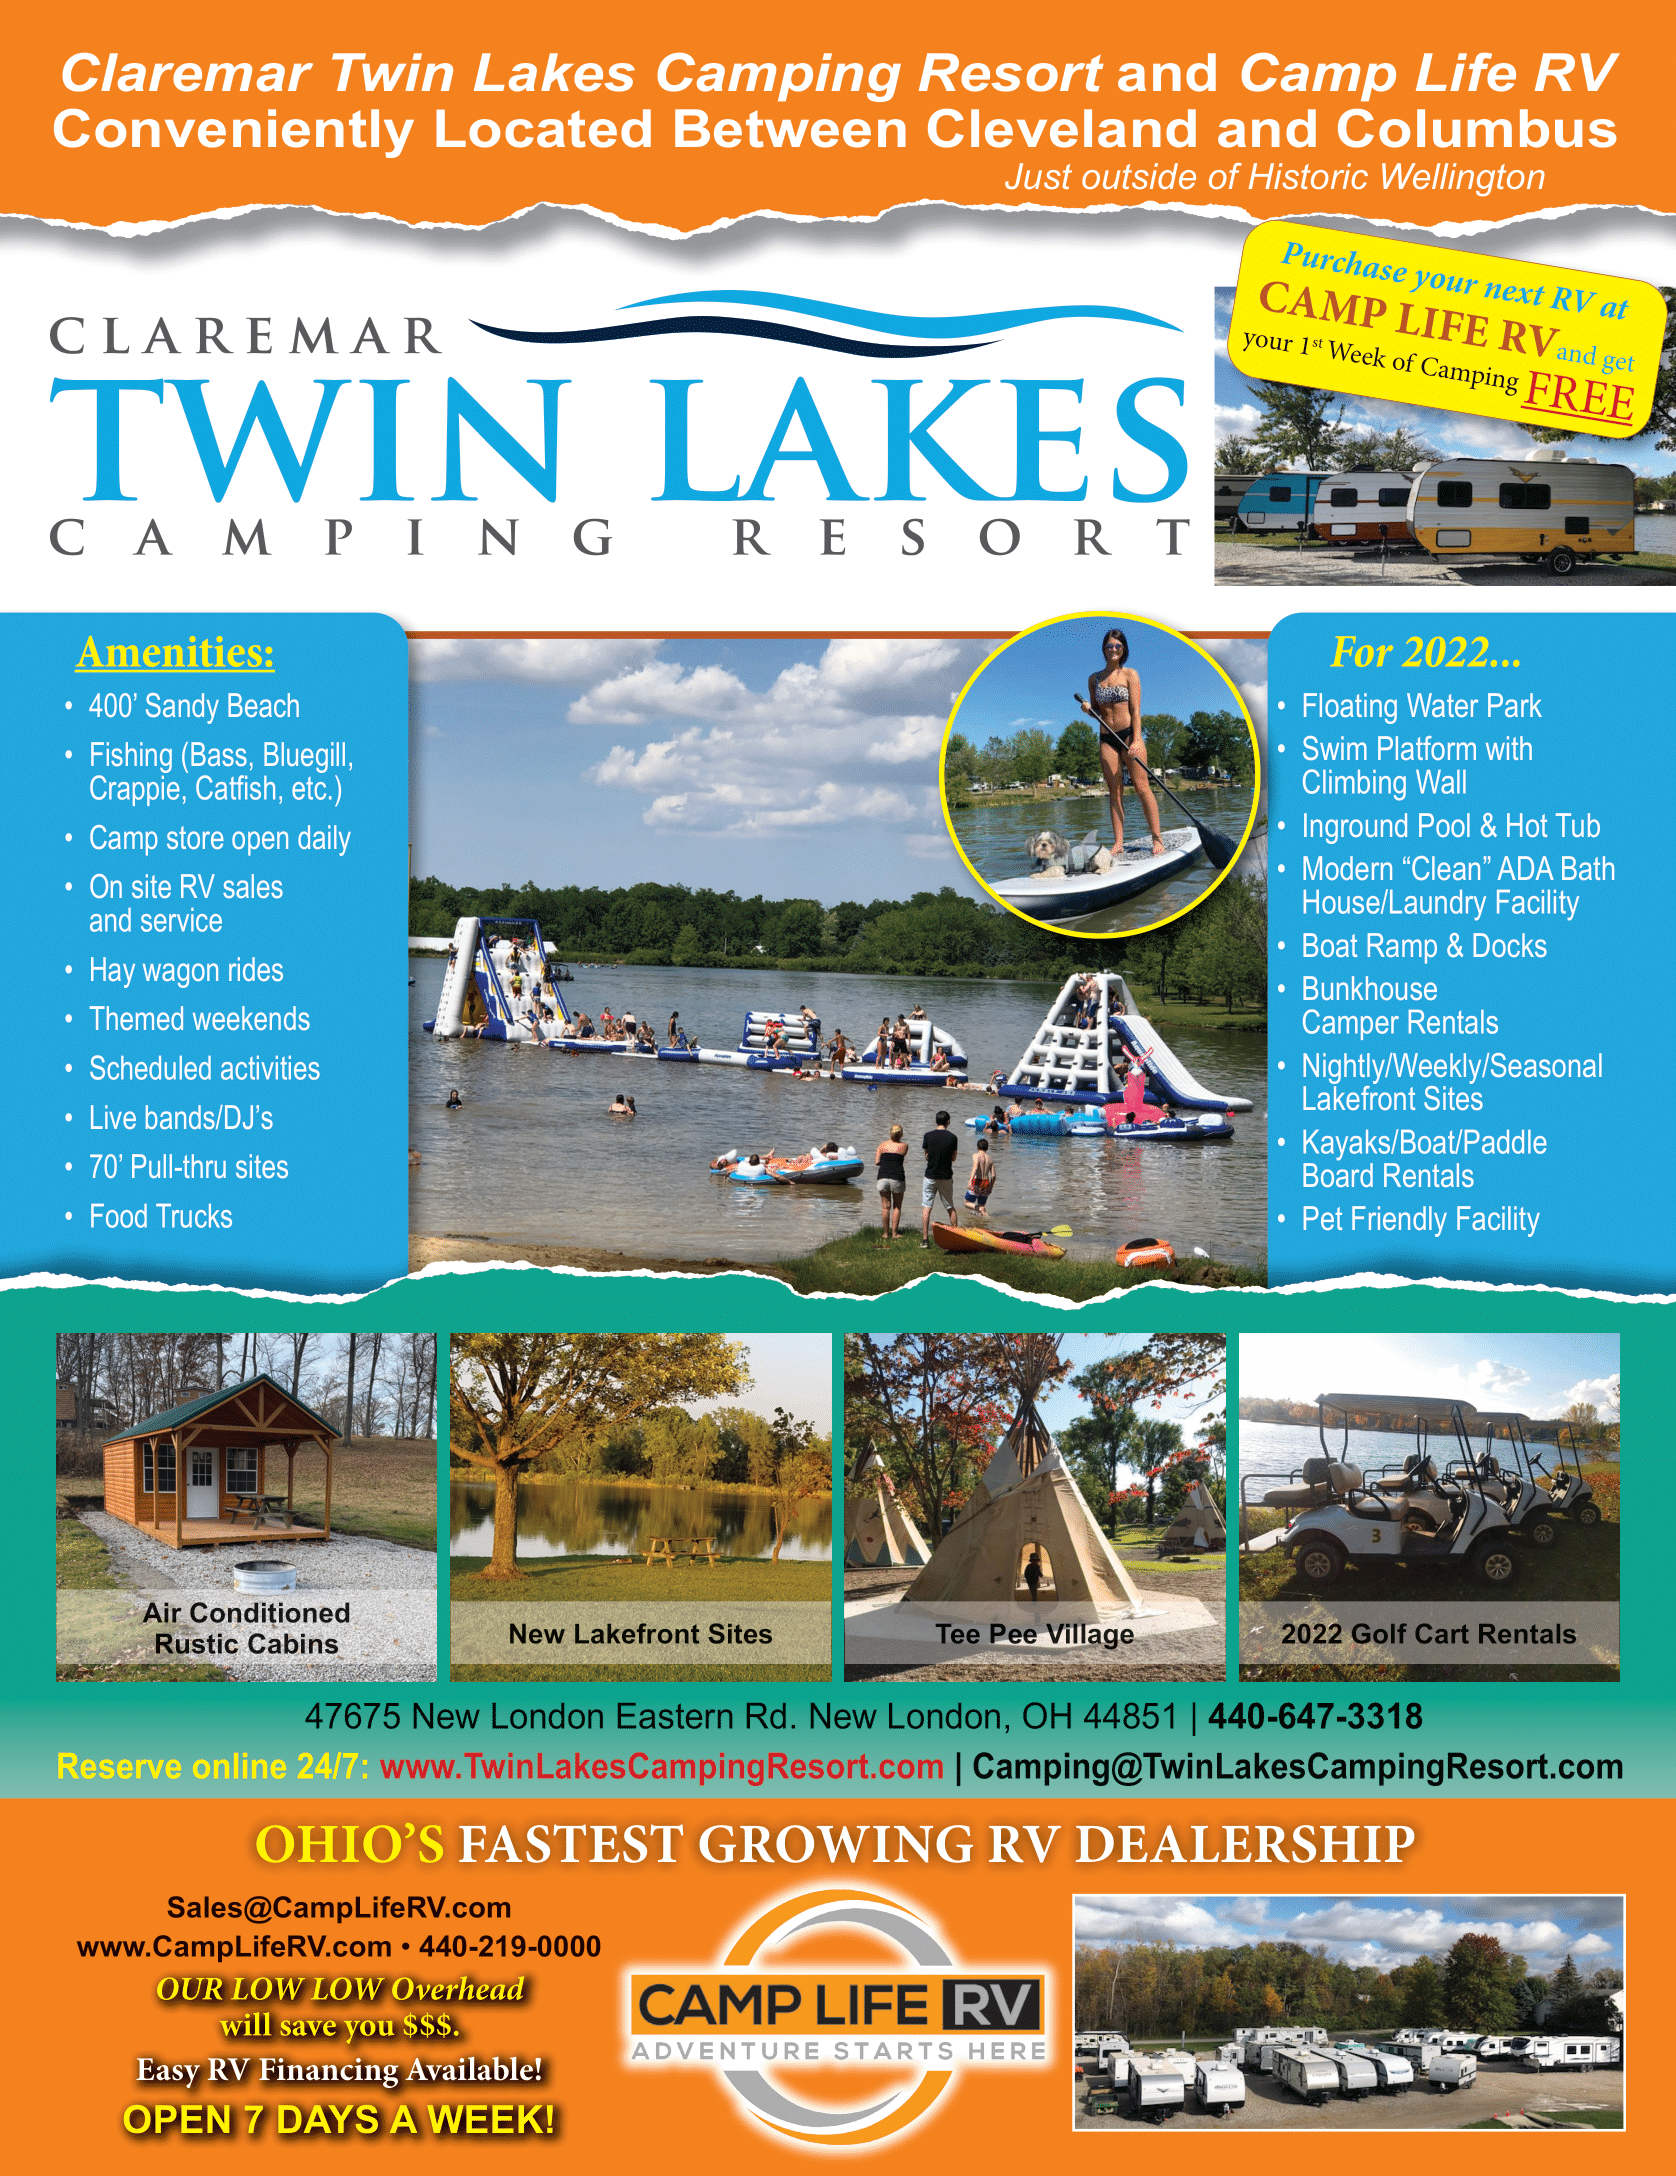 Discover Adventure at Claremar Twin Lakes Camping Resort